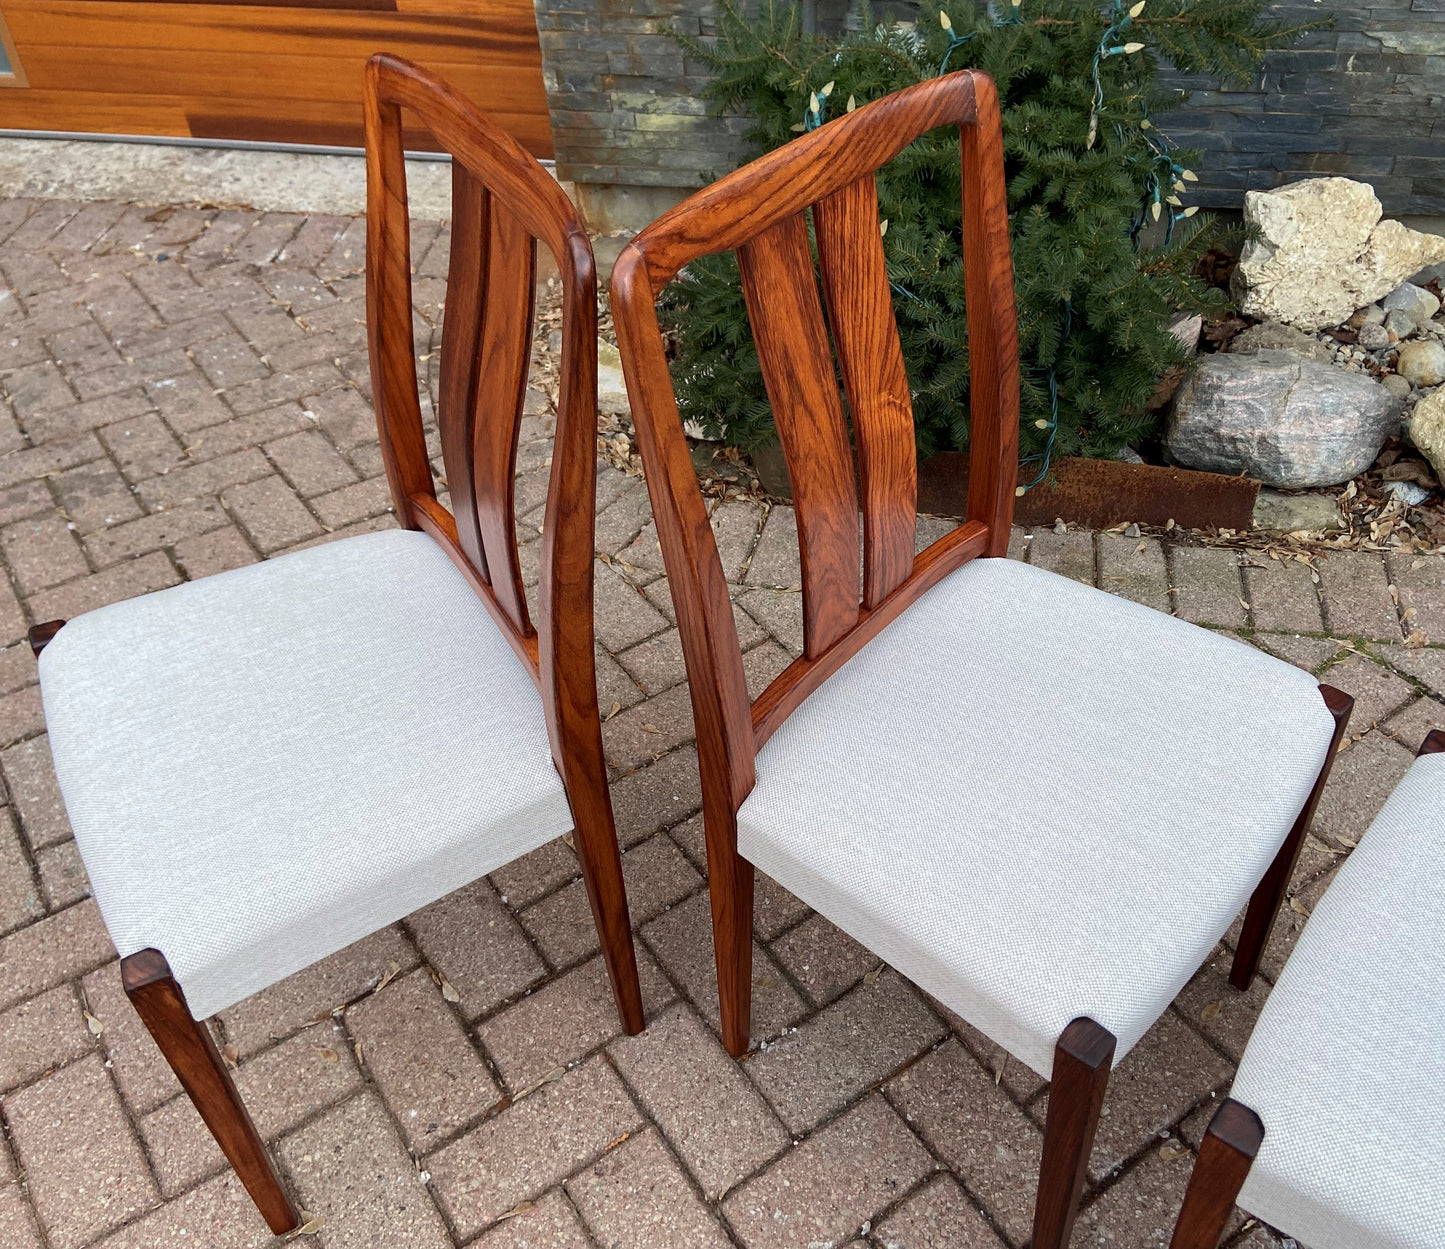 4 REFINISHED REUPHOLSTERED Swedish MCM Rosewood Chairs by Nils Jonsson, Perfect